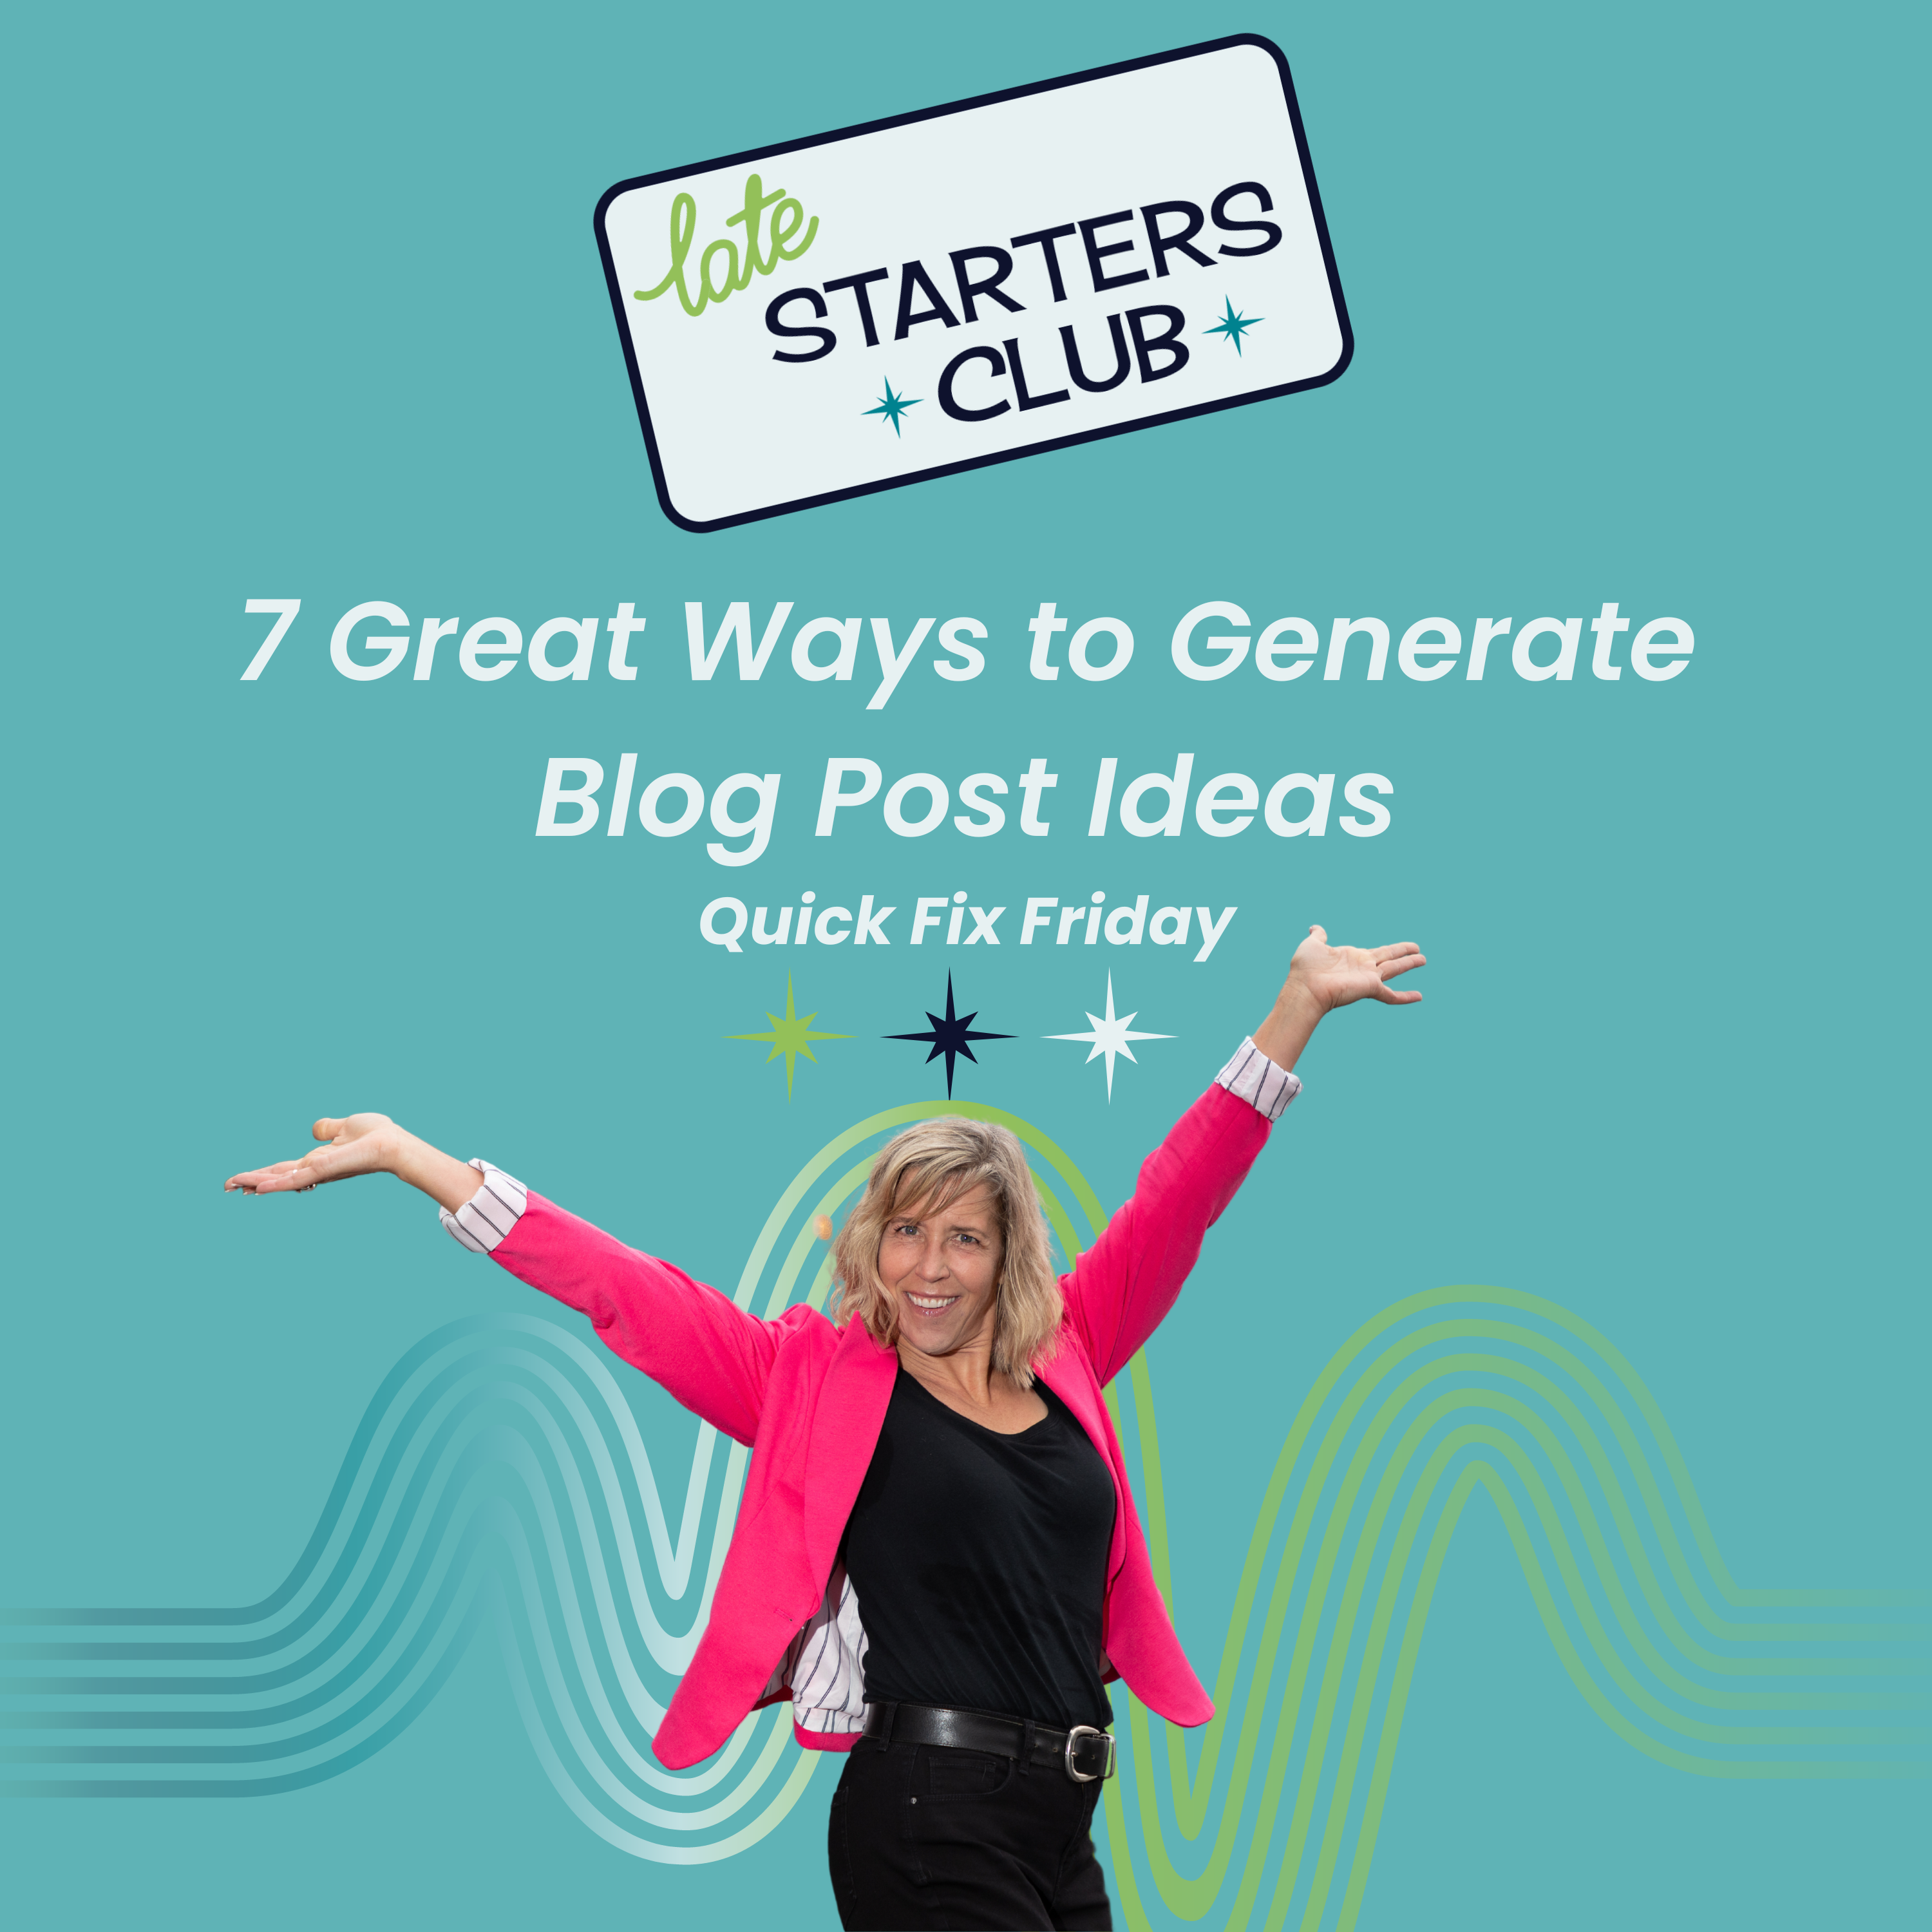 48: 7 Great Ways to Generate Blog Post Ideas – Quick Fix Friday